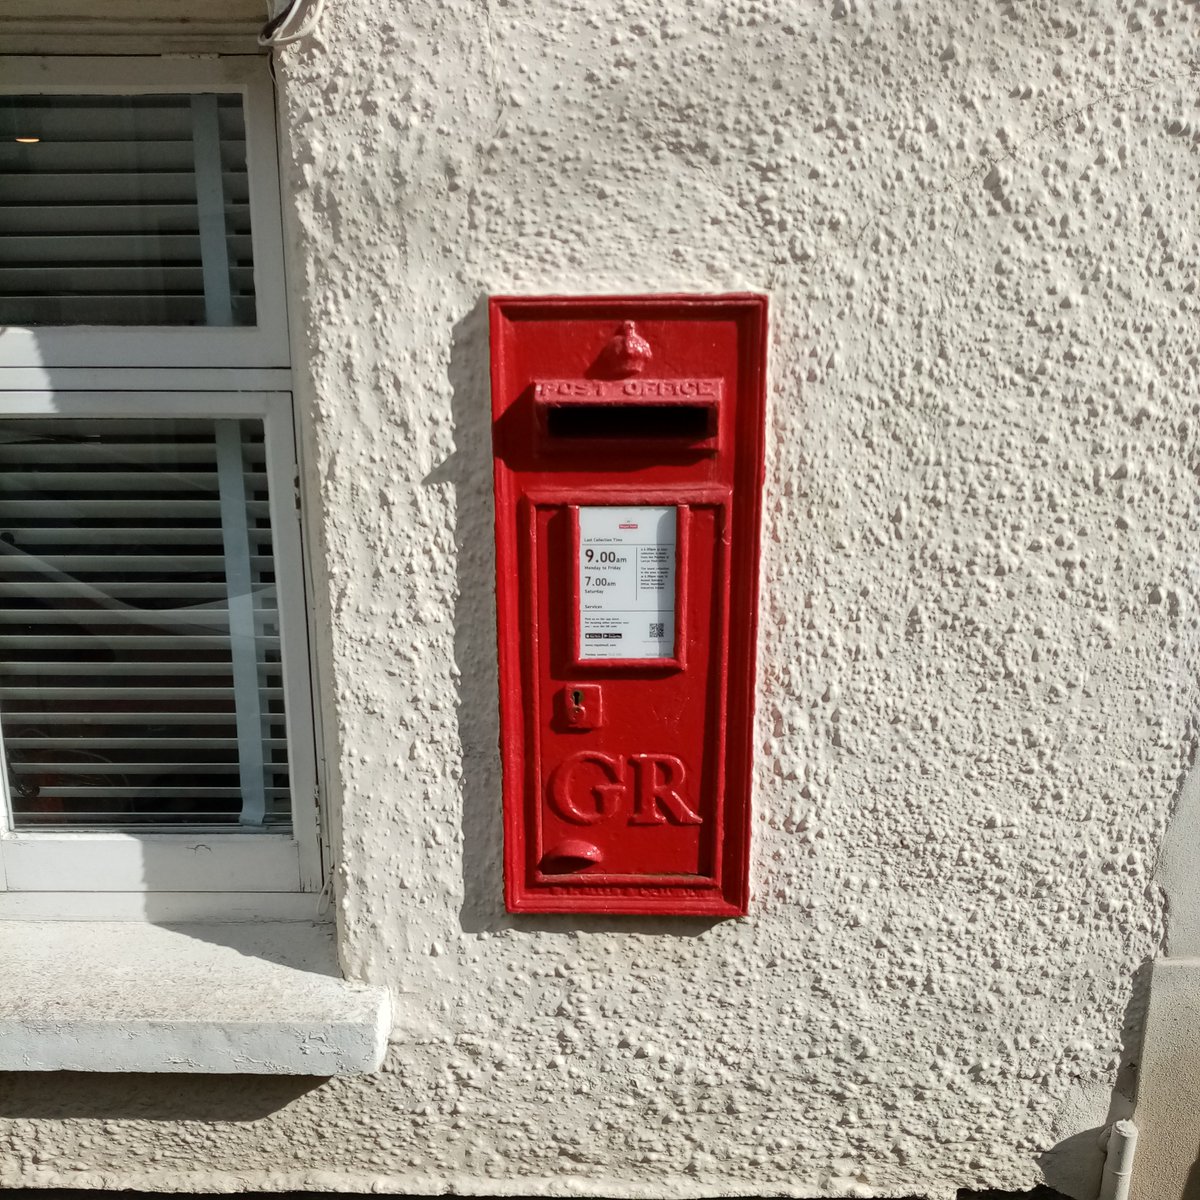 A smart looking GV edition, found lurking in a wall in Lostwithiel #Cornwall.  
#postboxsaturday